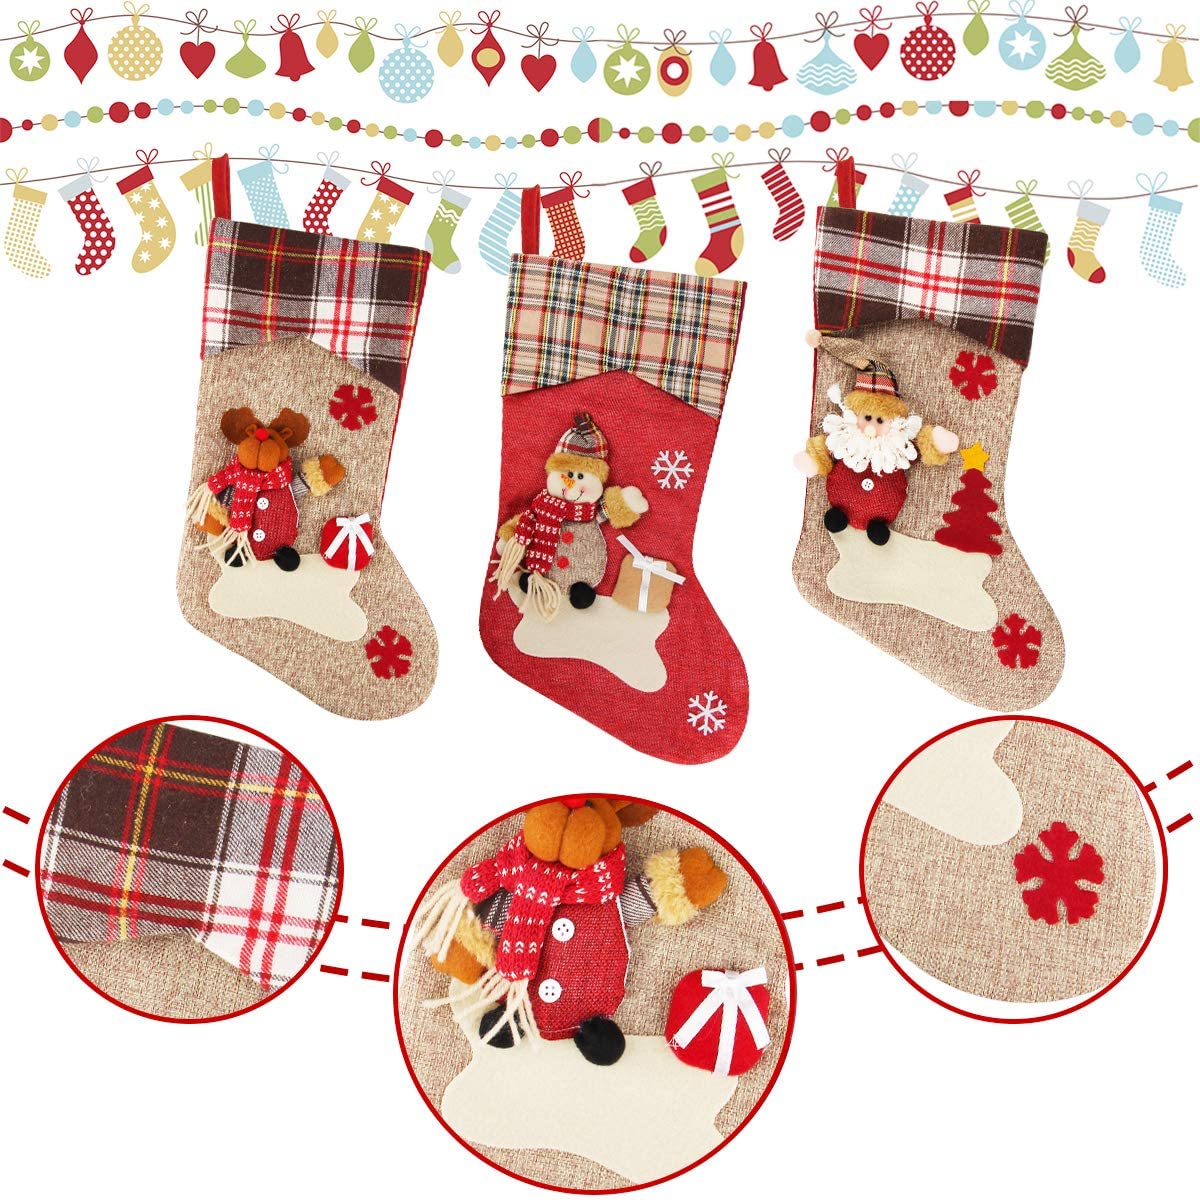 Reindeer Xmas Character 3D Plush Stockings Xmas Classic Decoration for Family Holiday Christmas Party Decorations Snowman Diamerd Christmas Stocking 3 Pack 17.3 Santa